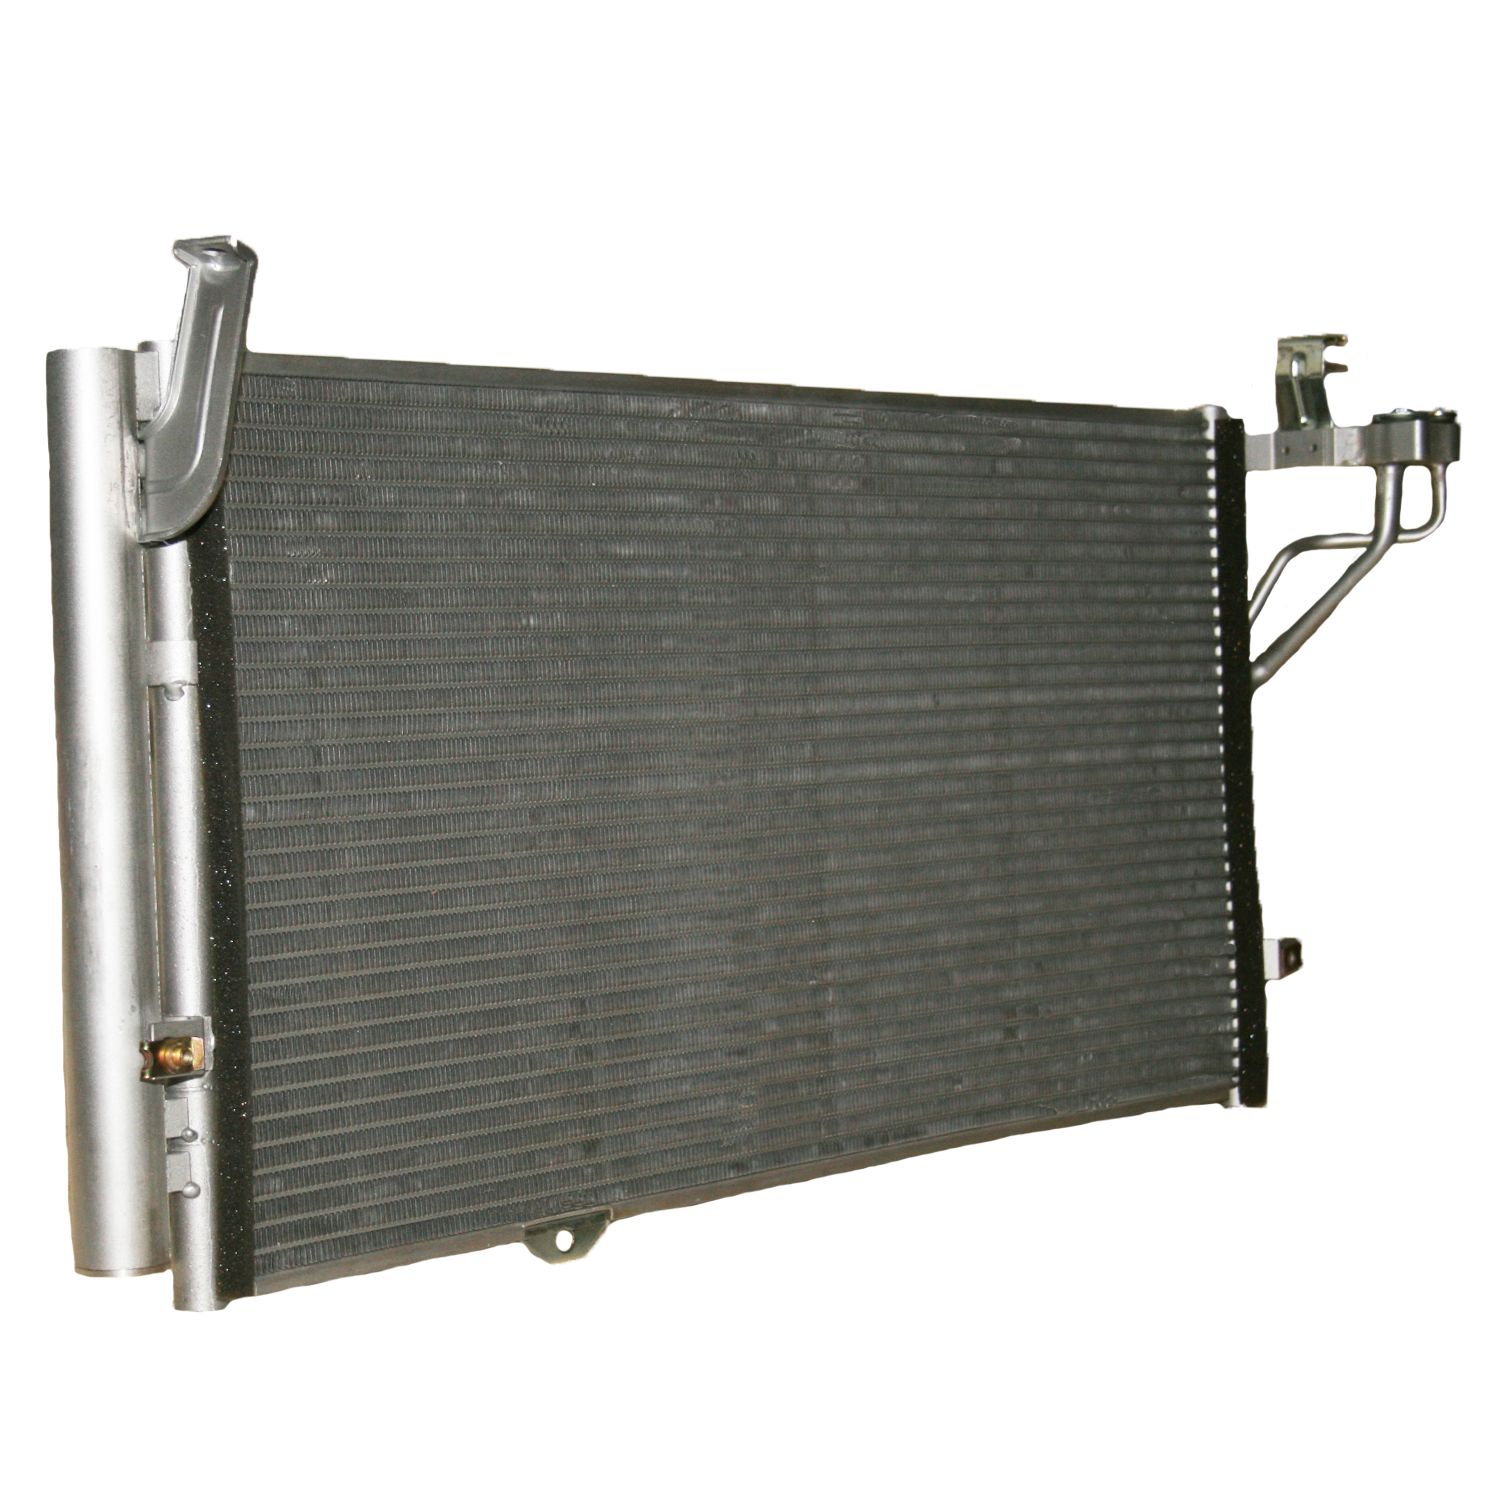 TCW Condenser 44-3345 New Product Image field_60b6a13a6e67c